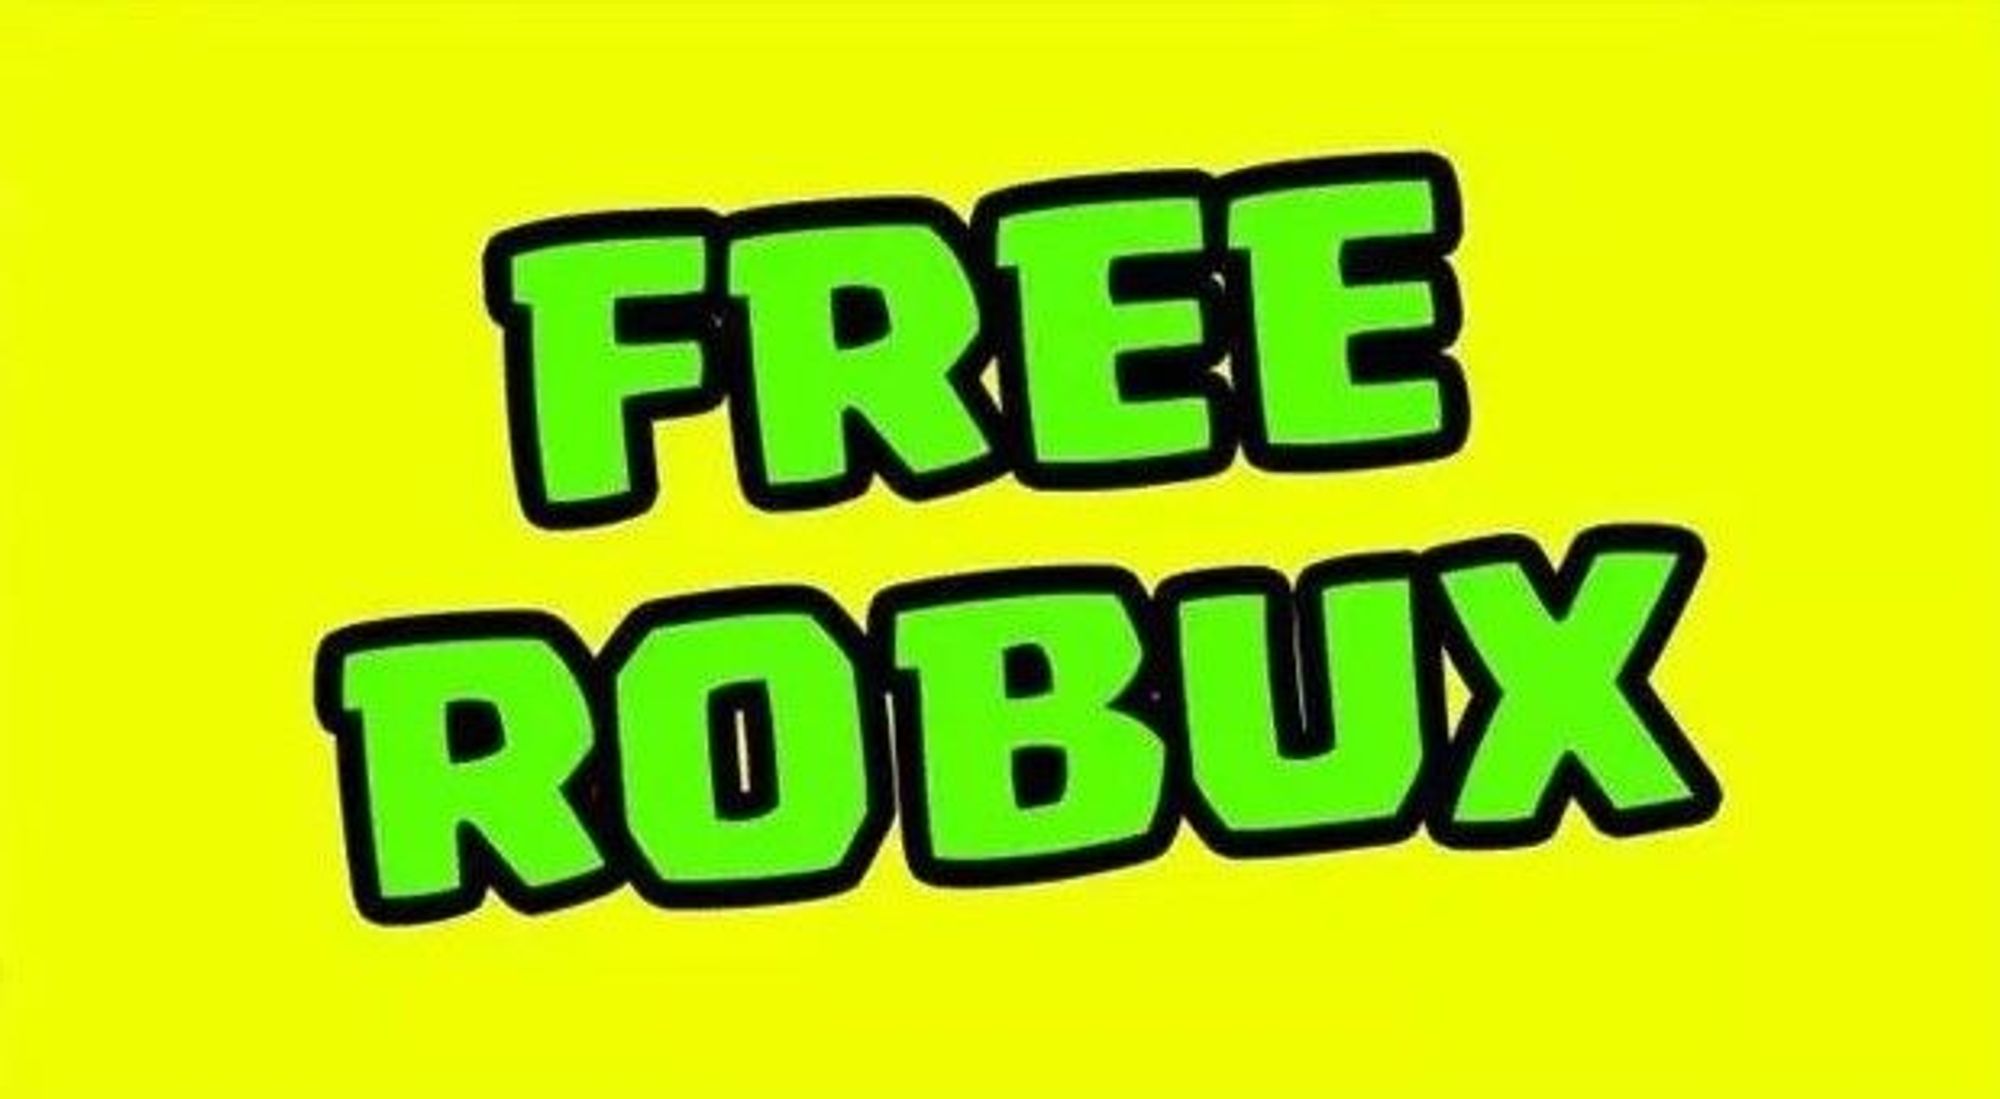 How To Get Free Robux - free robux generator earn free robux assets online